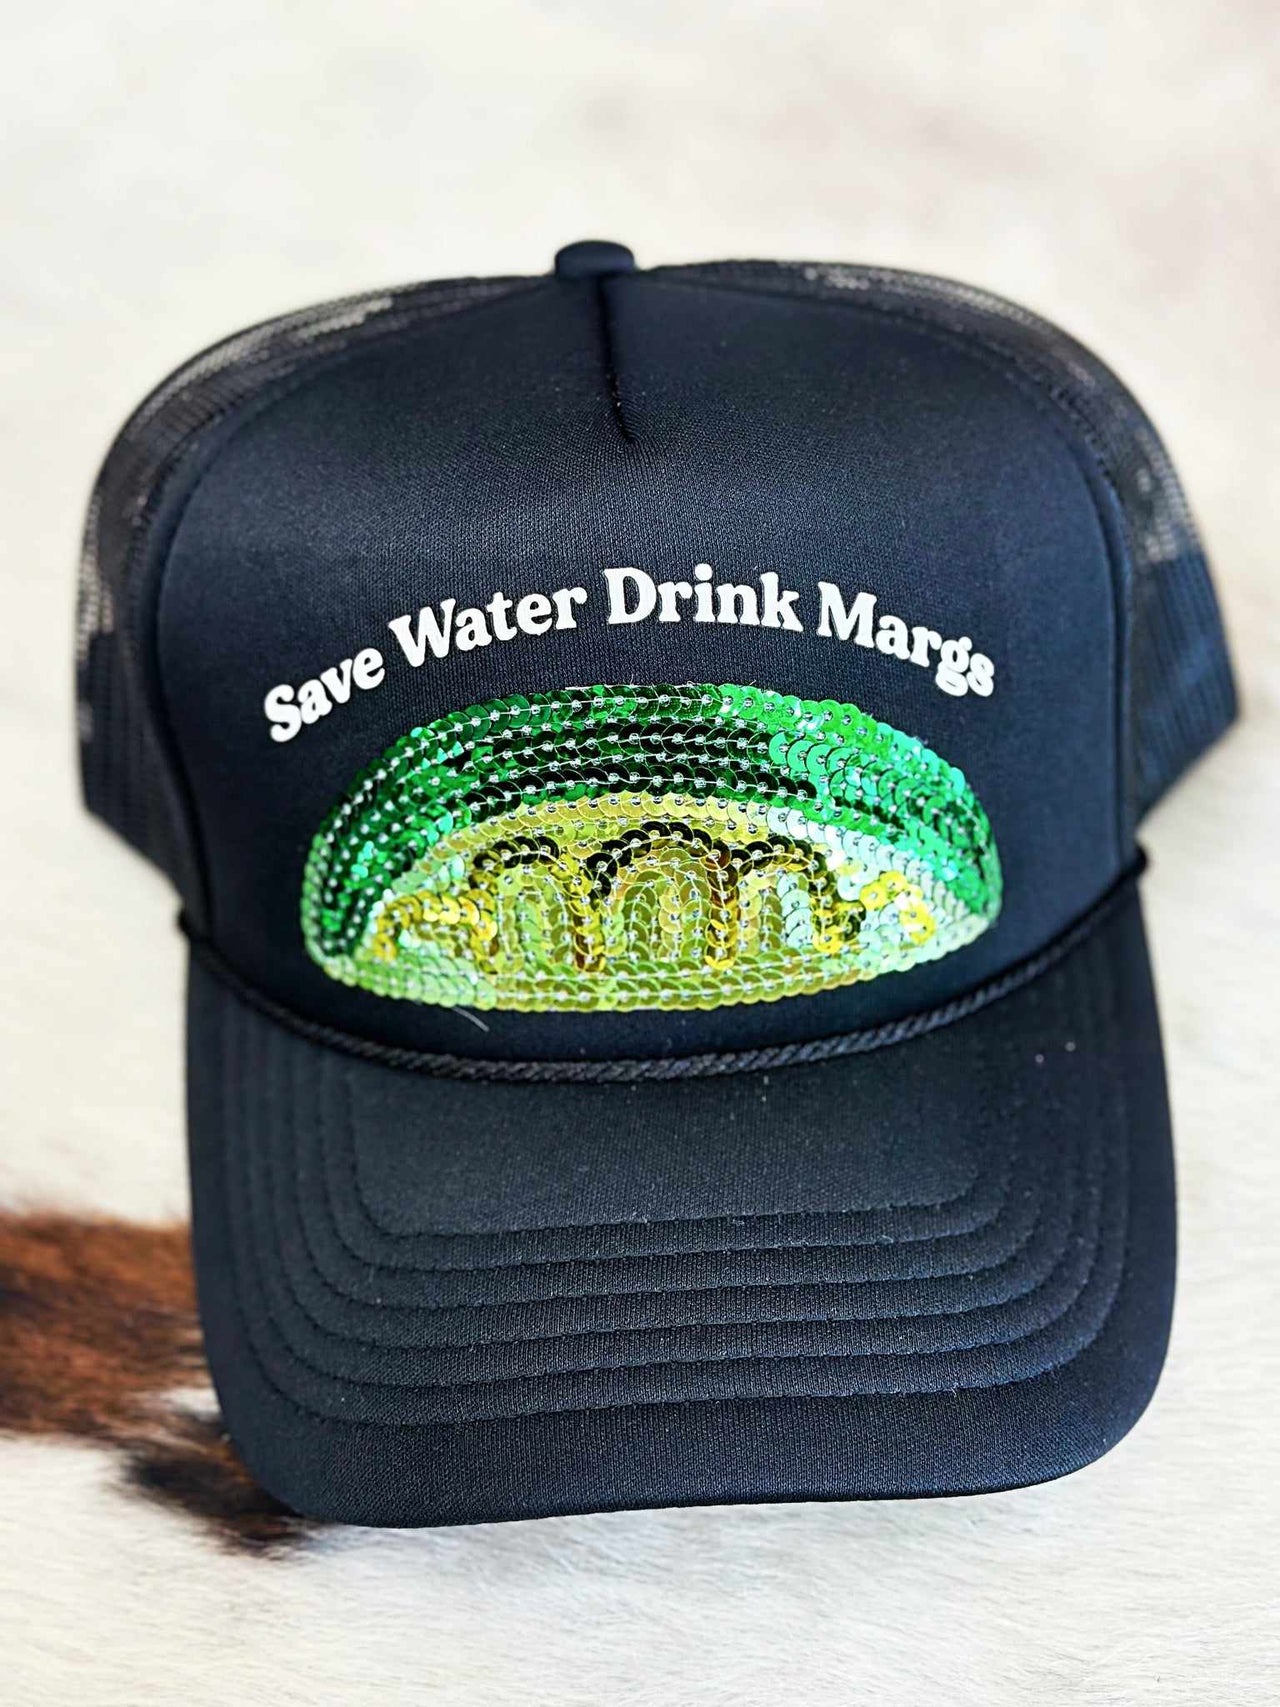 Save Water Drink Margs Sequin Lime Trucker Hat - Black